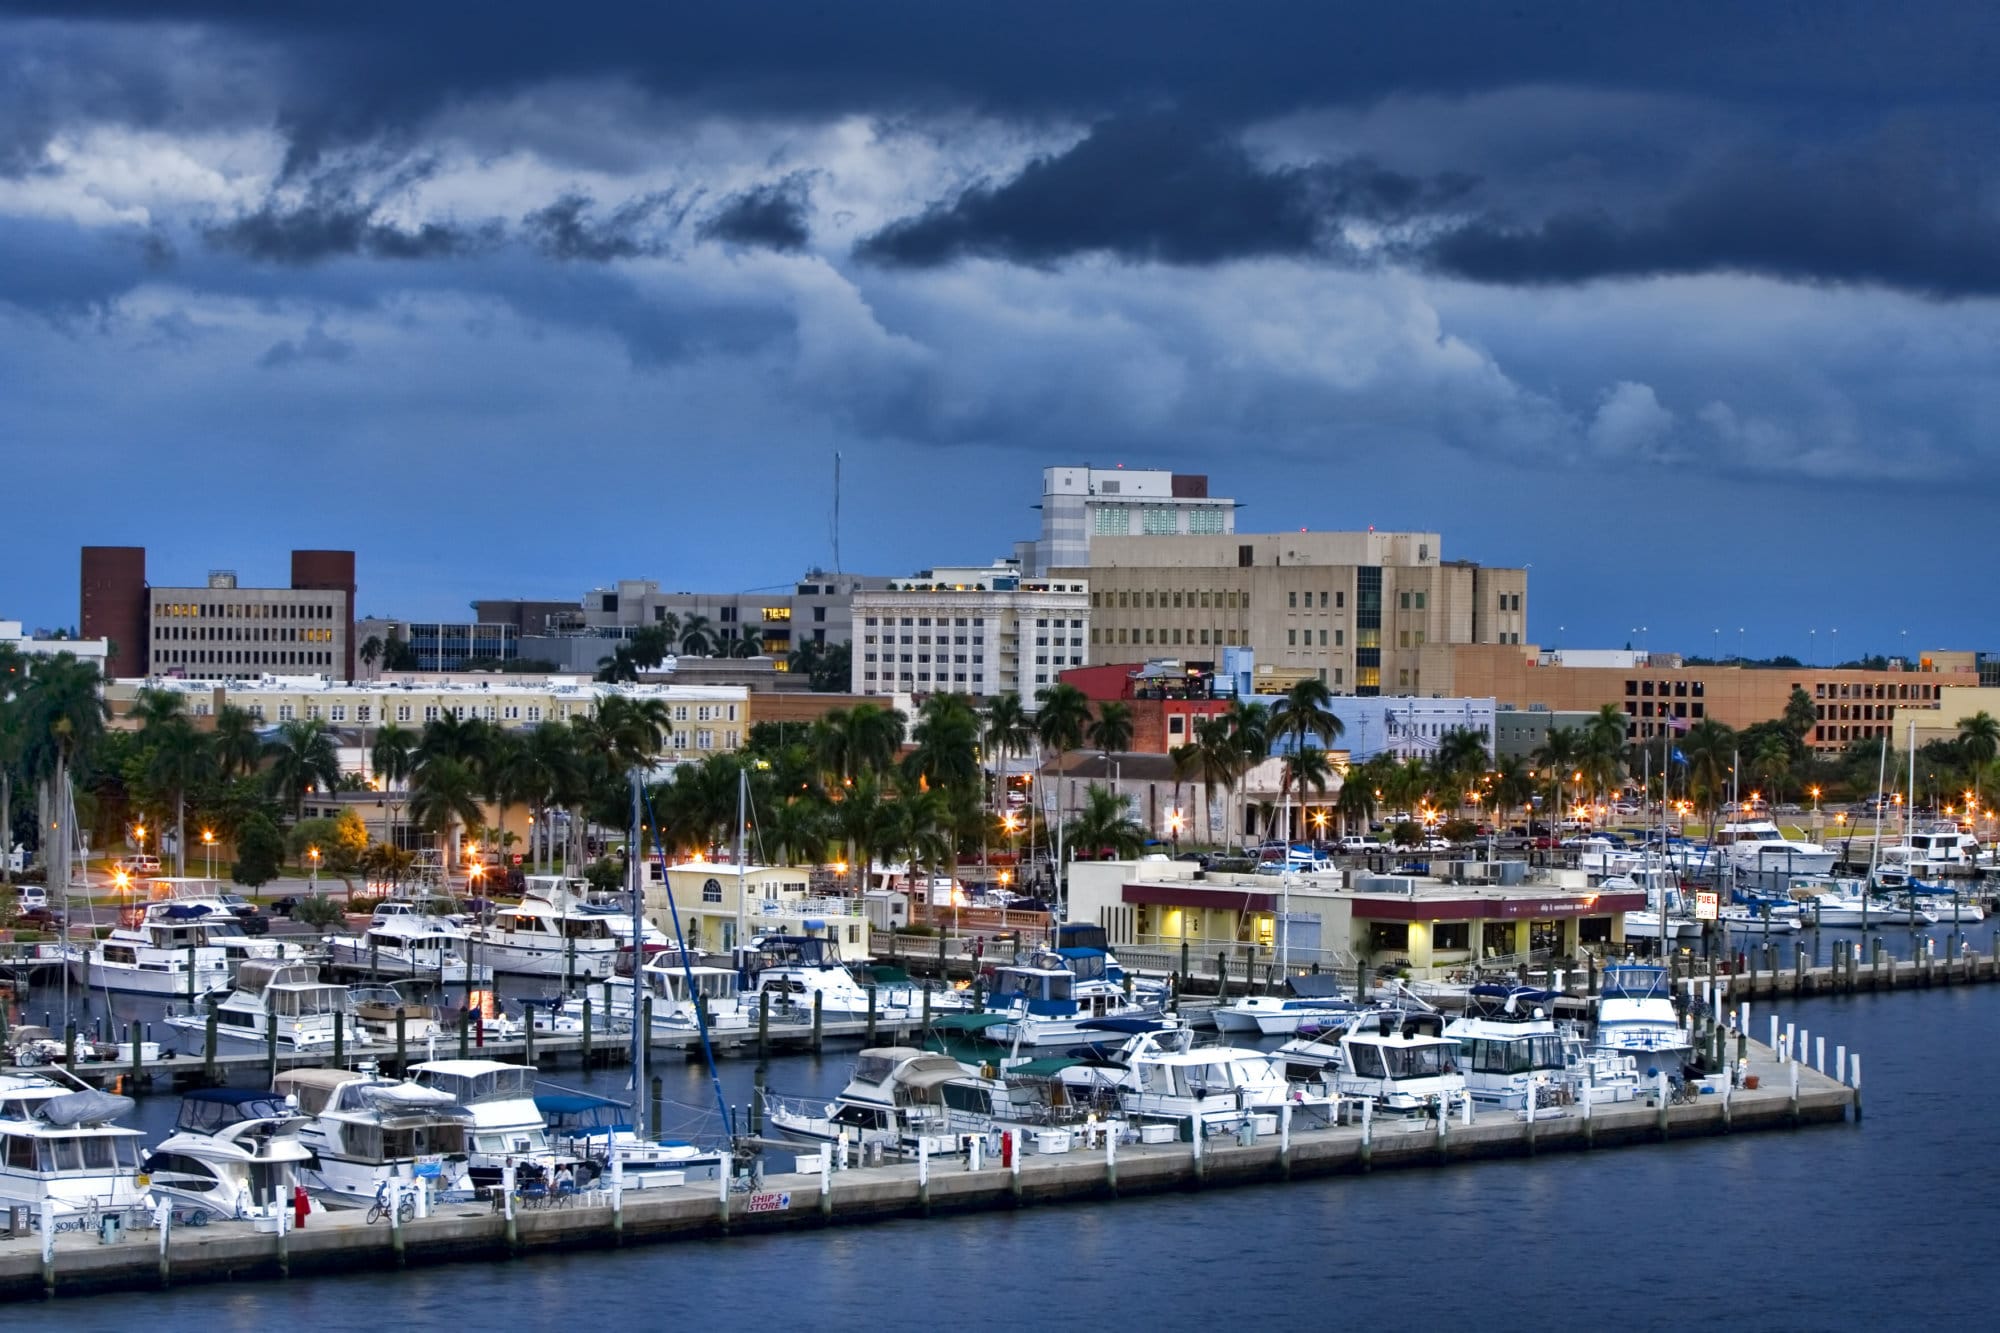 Overlooking downtown Fort Myers, Florida with the yacht basin in the foreground.  Typical summer late afternoon with storm clouds lingering.